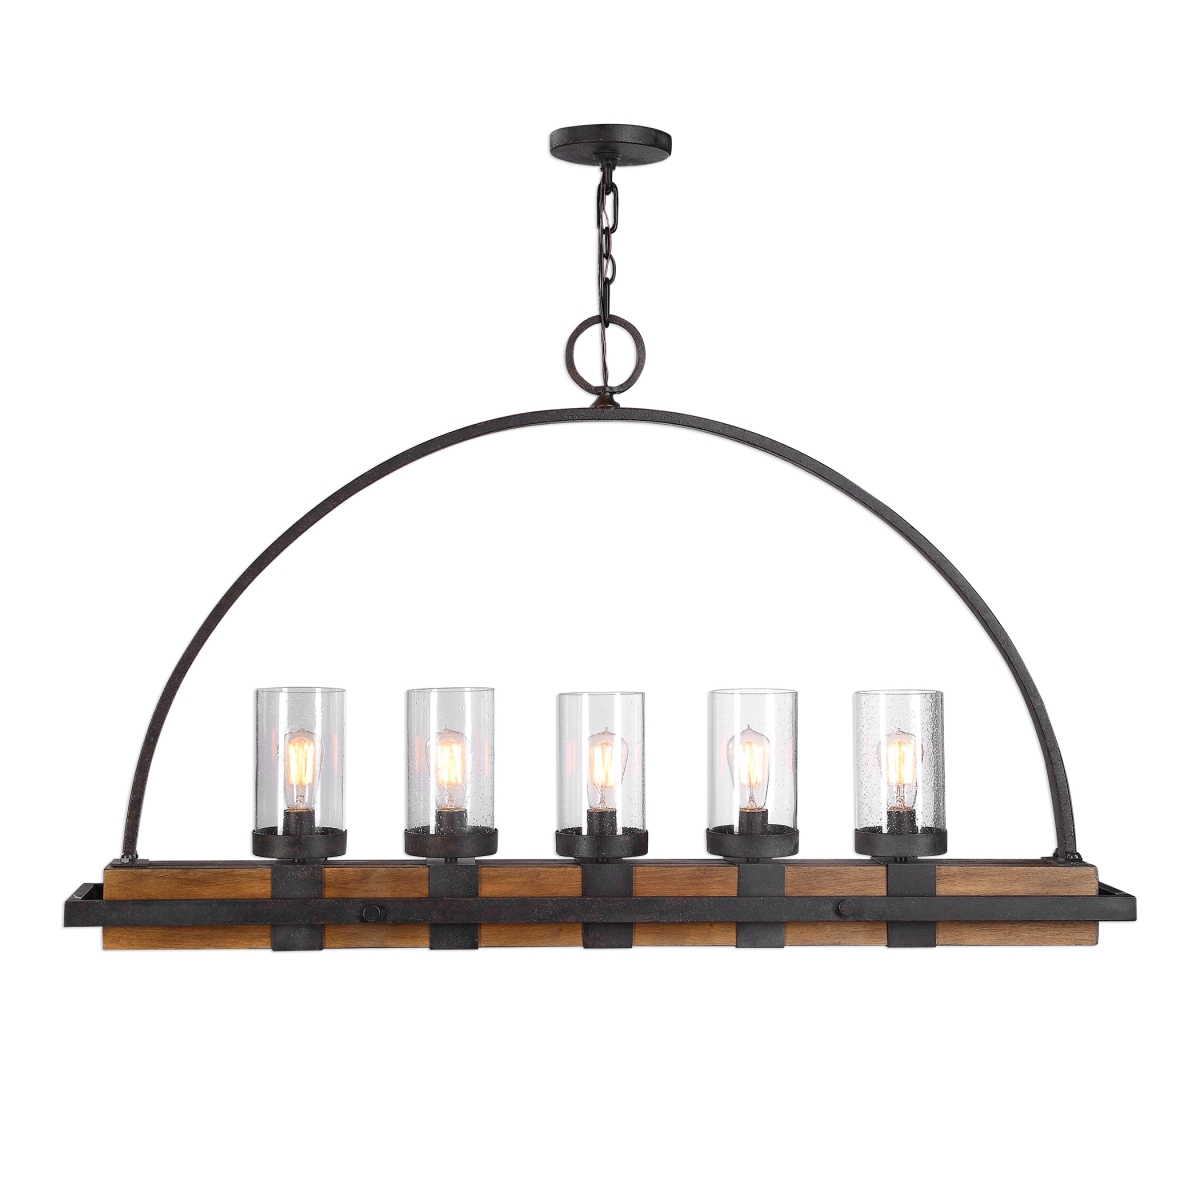 Picture of 212 Main 21328 Atwood 5 Light Rustic Linear Chandelier